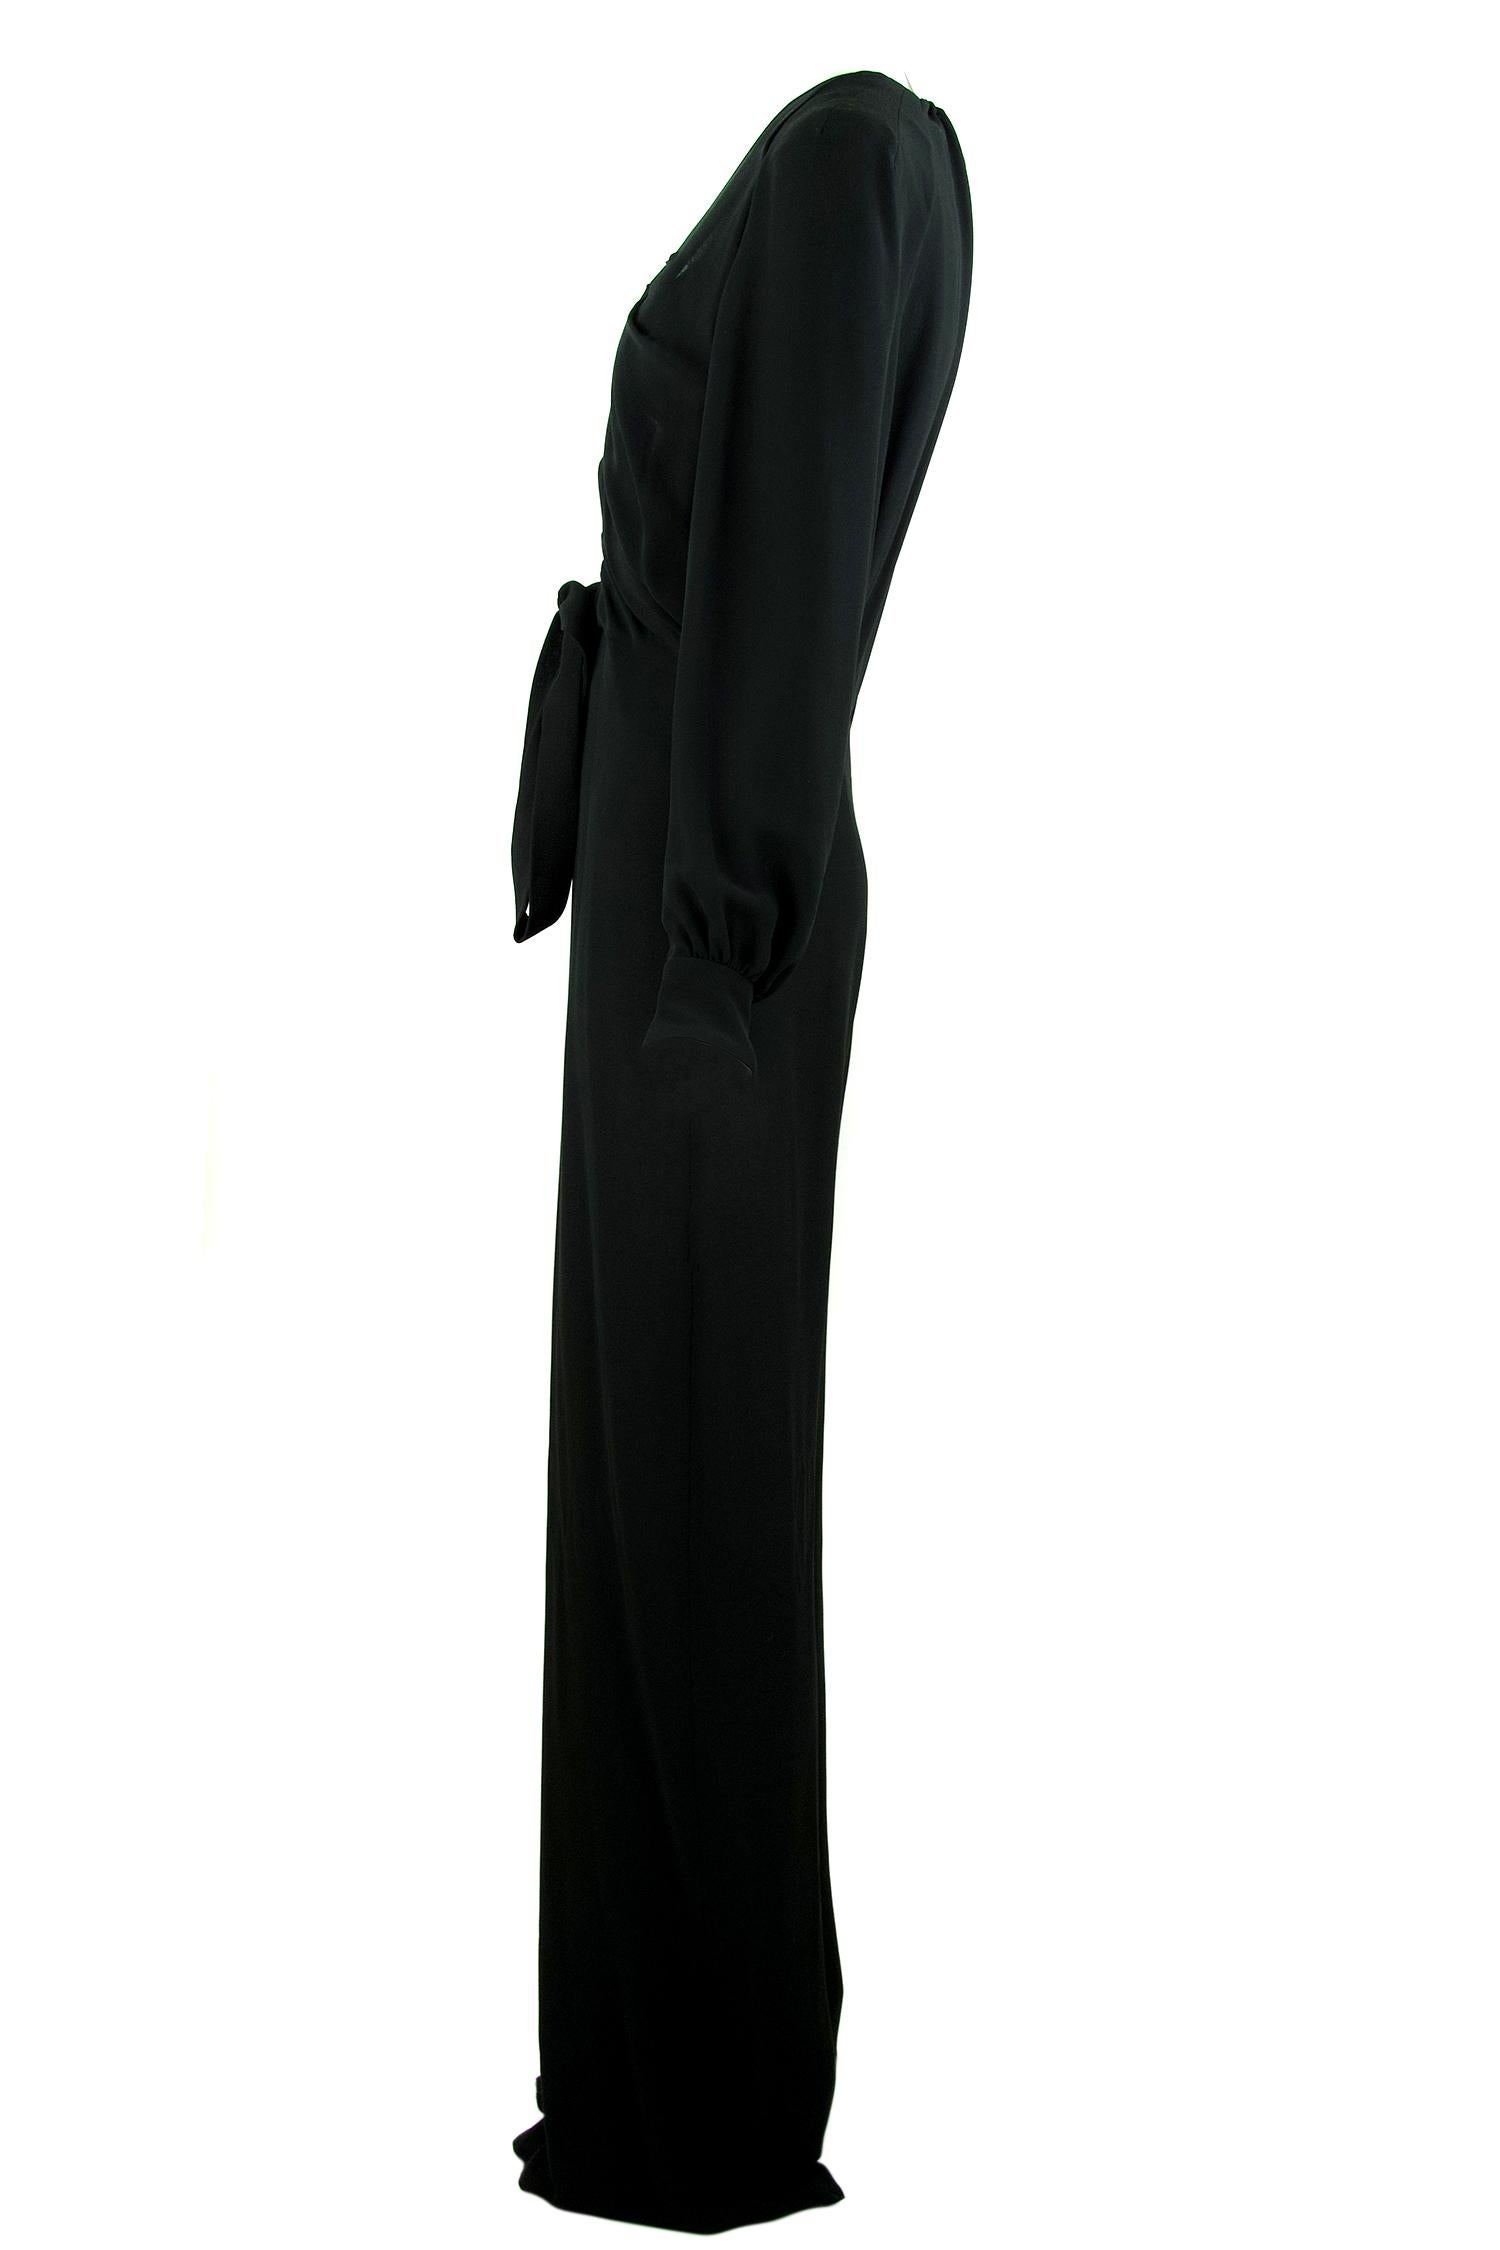 Chic and sexy Chloe long sleeve black jumpsuit.  Features gathered black silk fabric and a very low v neck with a tie at the bottom.  Gathering on the back and at the cuffs.  

Size: FR 40

Condition: Pristine

Composition: 100% silk

Care: Dry